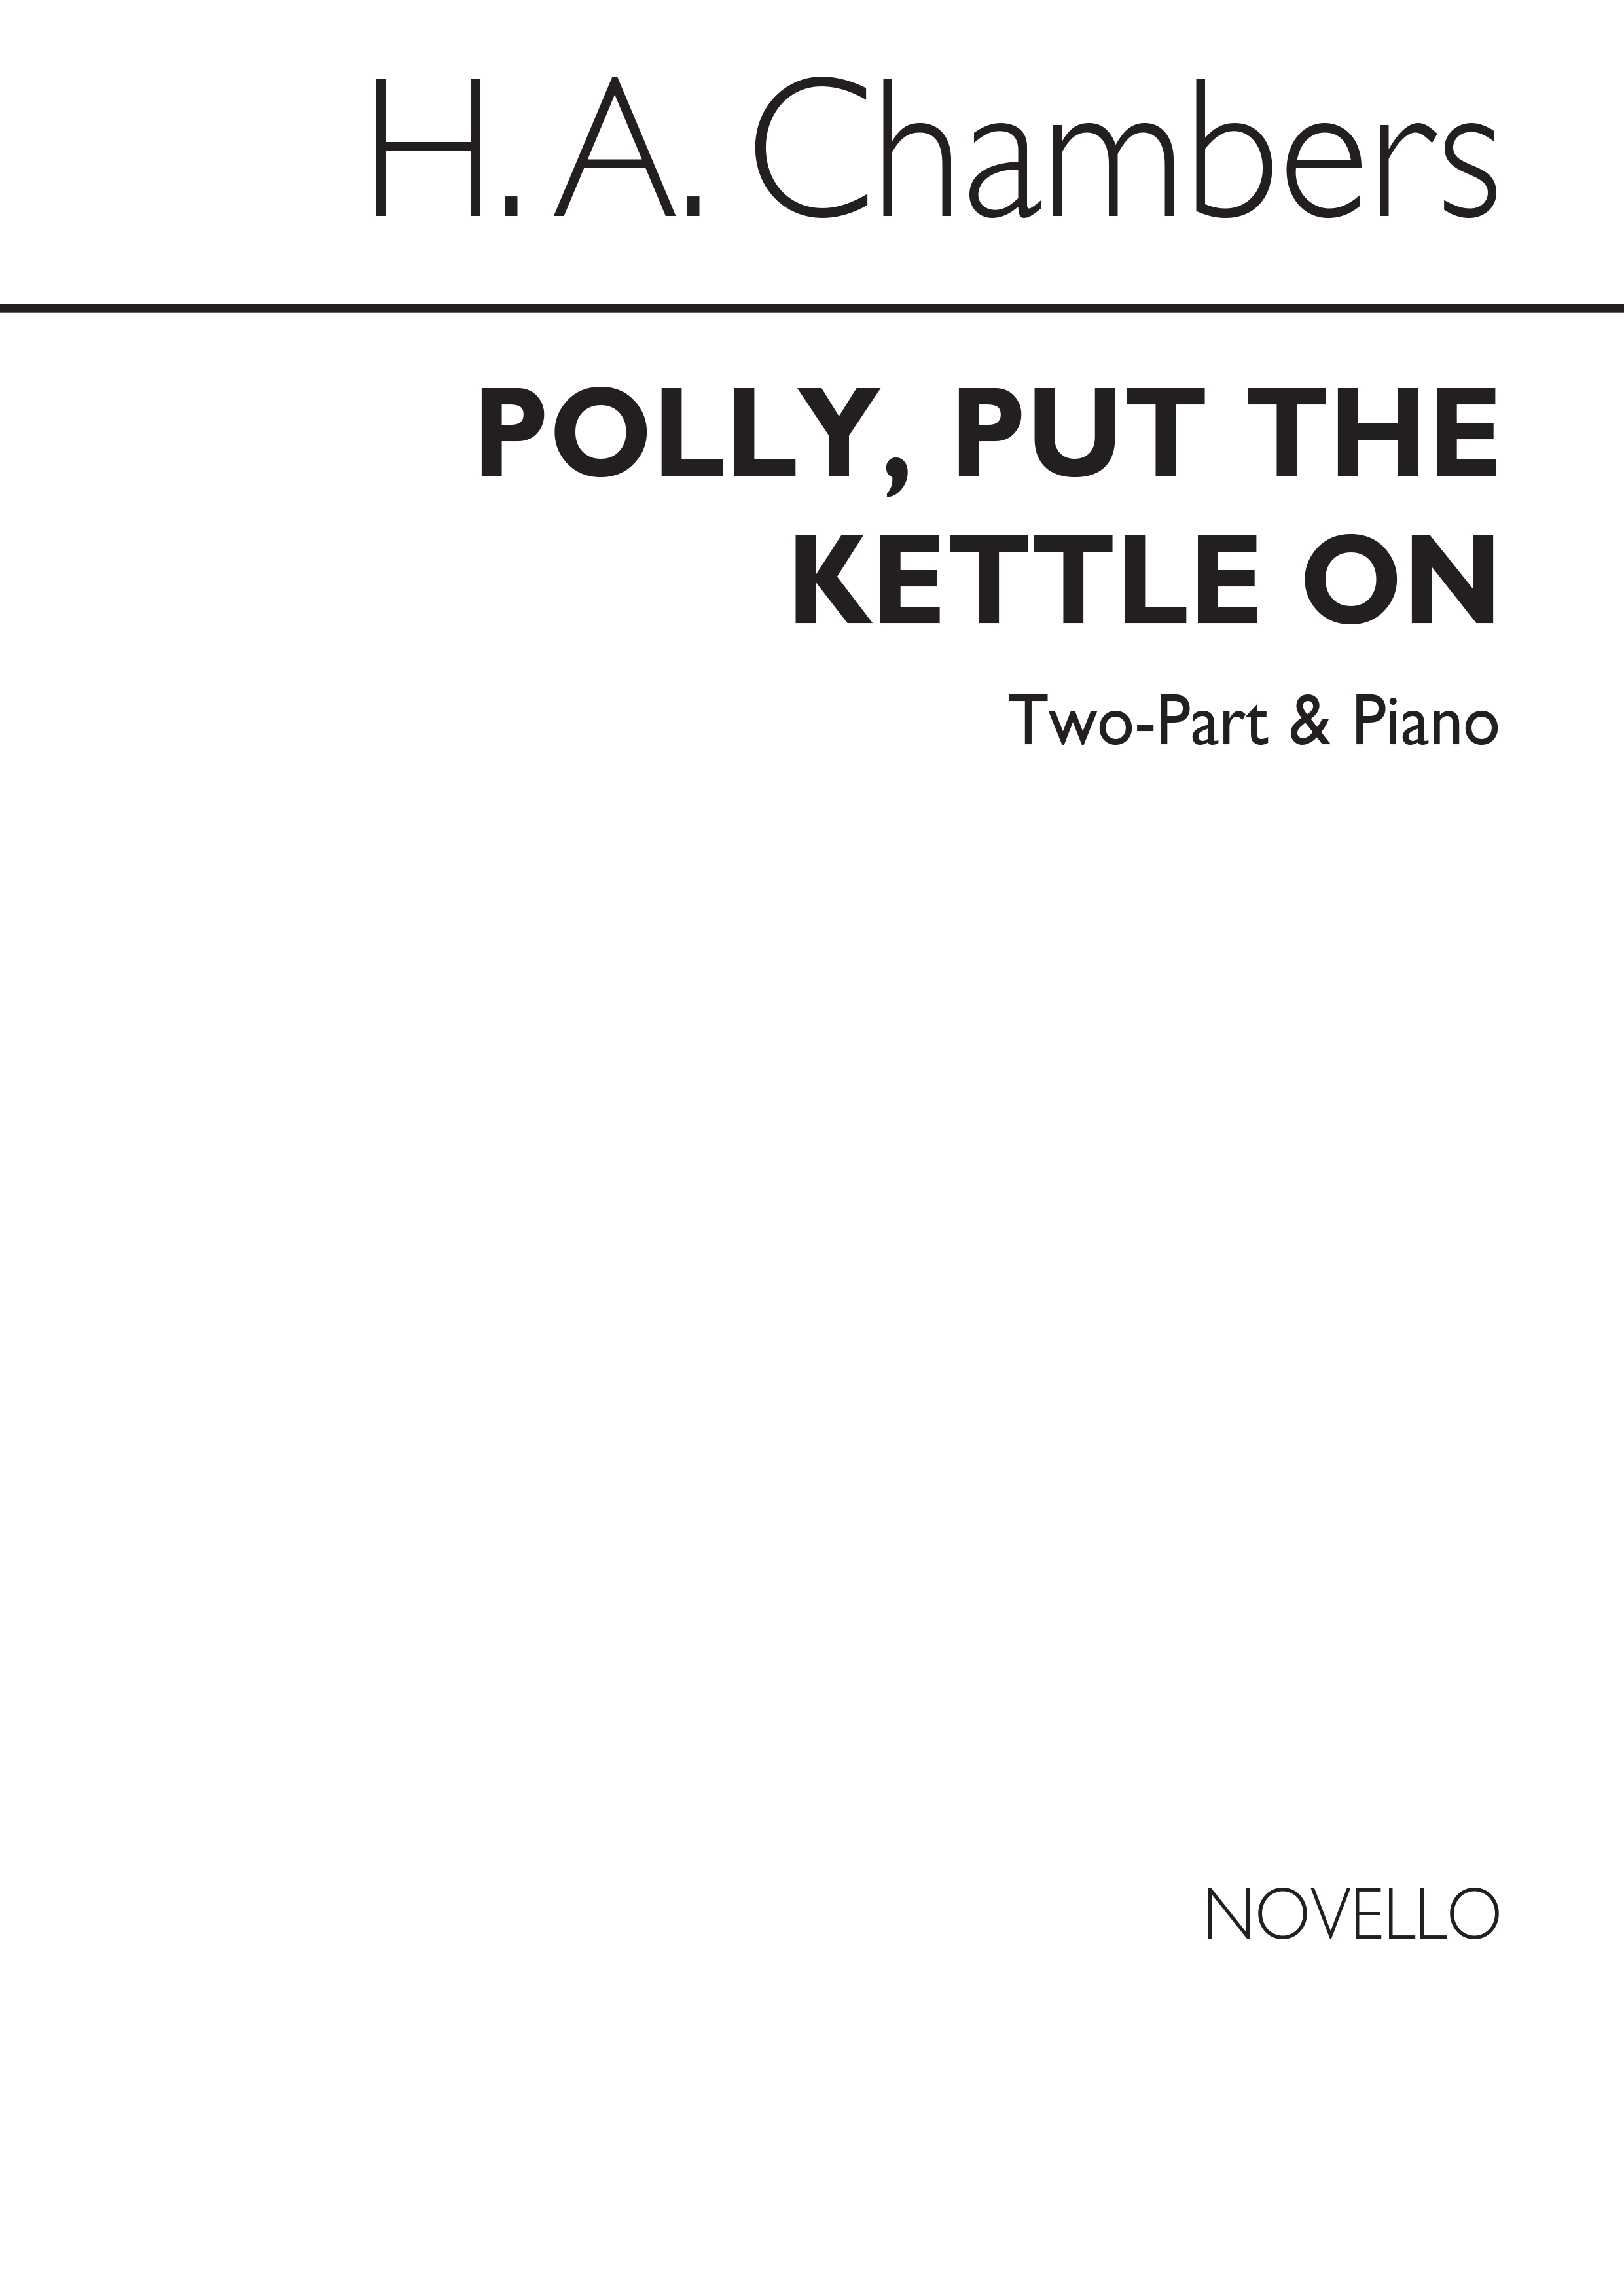 H.A. Chambers: Polloy Put The Kettle On 2-Part/Piano